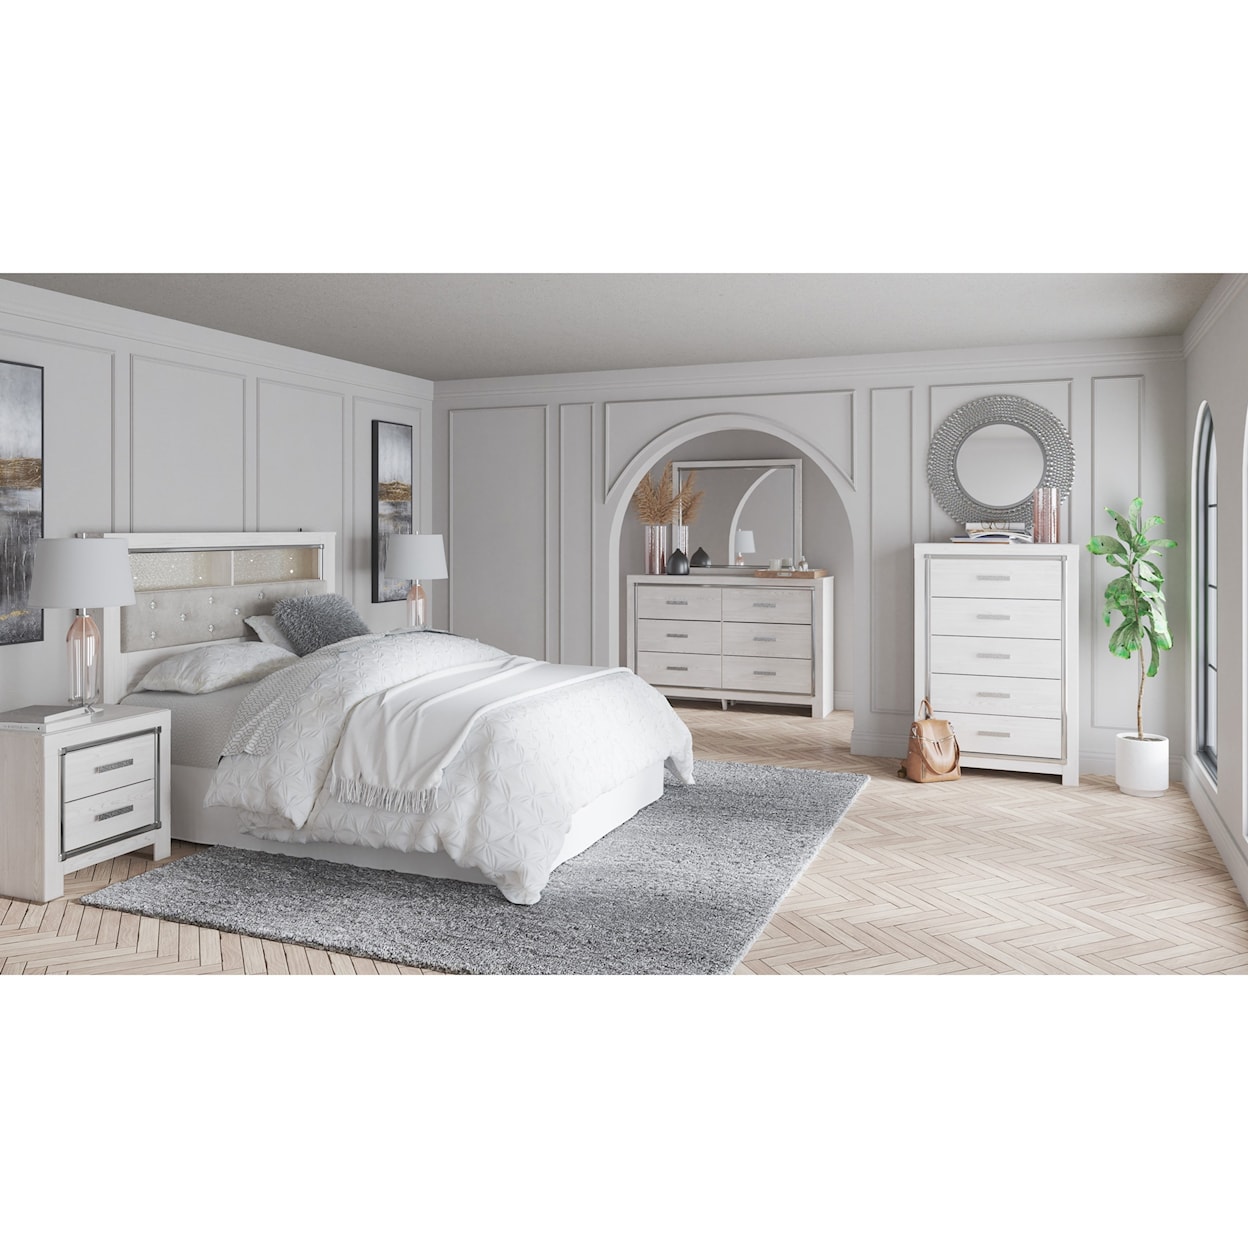 Signature Design by Ashley Altyra 5PC Queen Bedroom Group